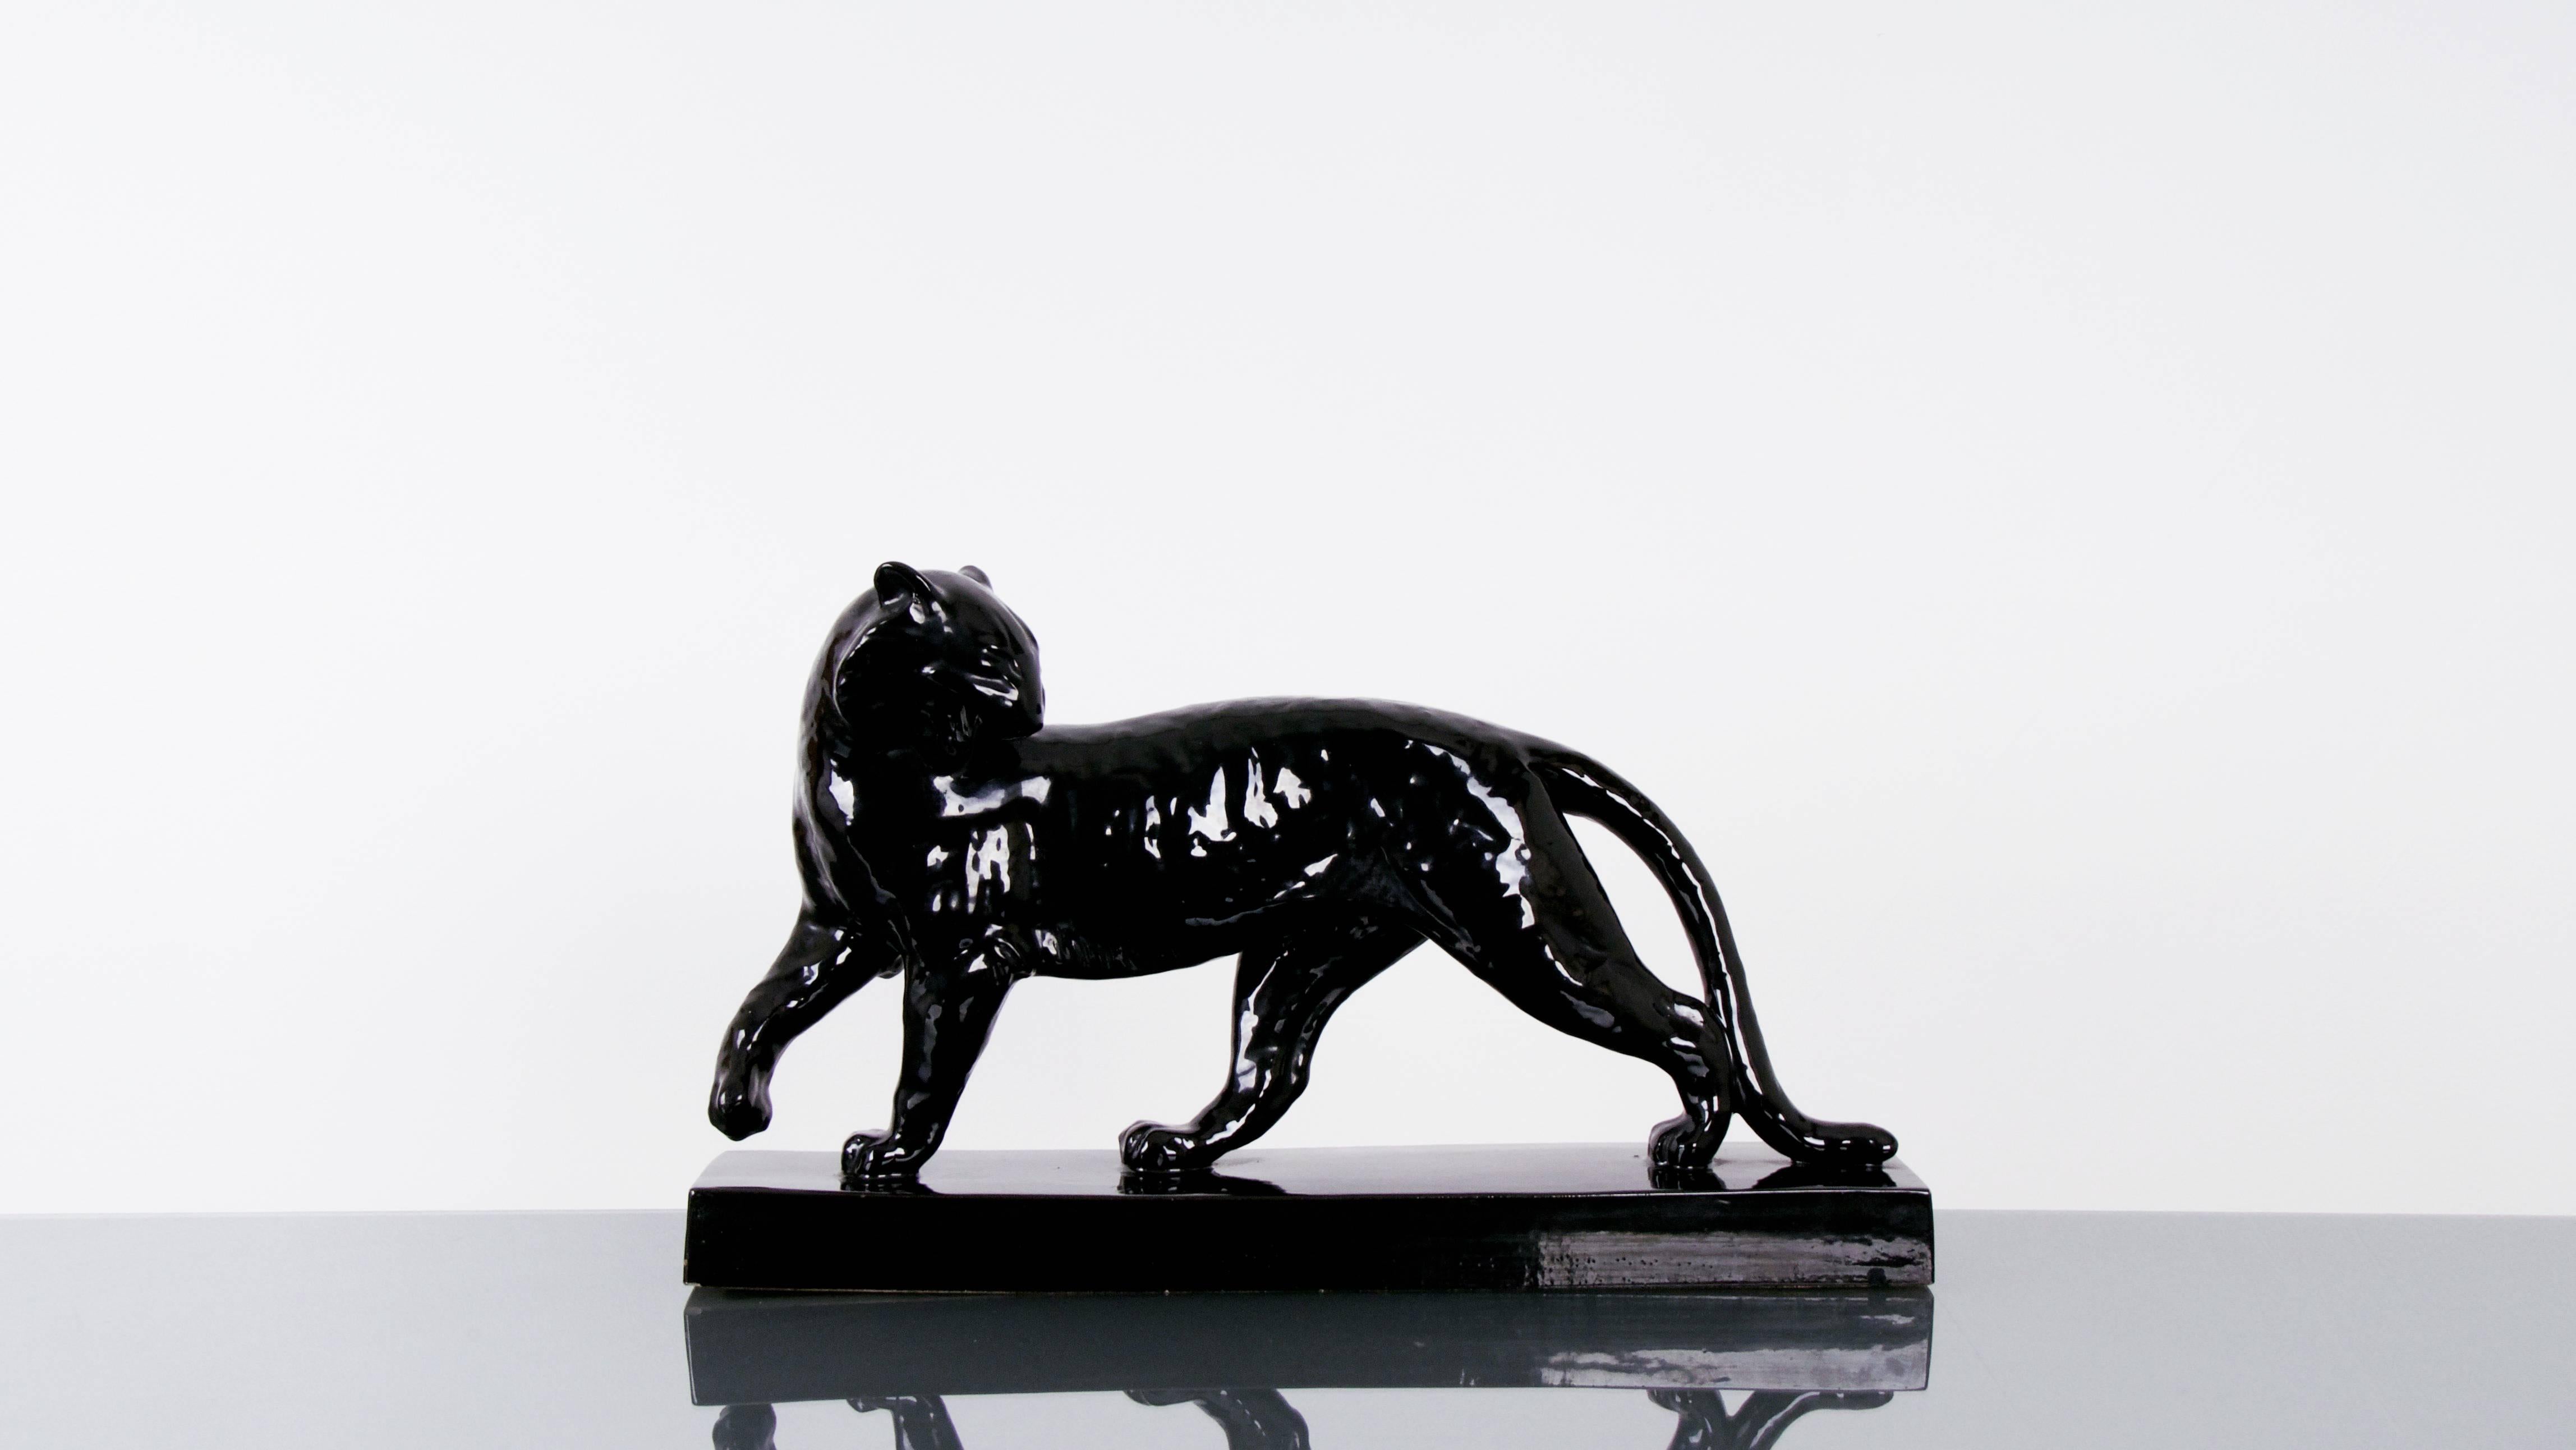 A black panther in glazed ceramic made by Alexandre Kelley and Marcel Guillard. Signed and stamped.